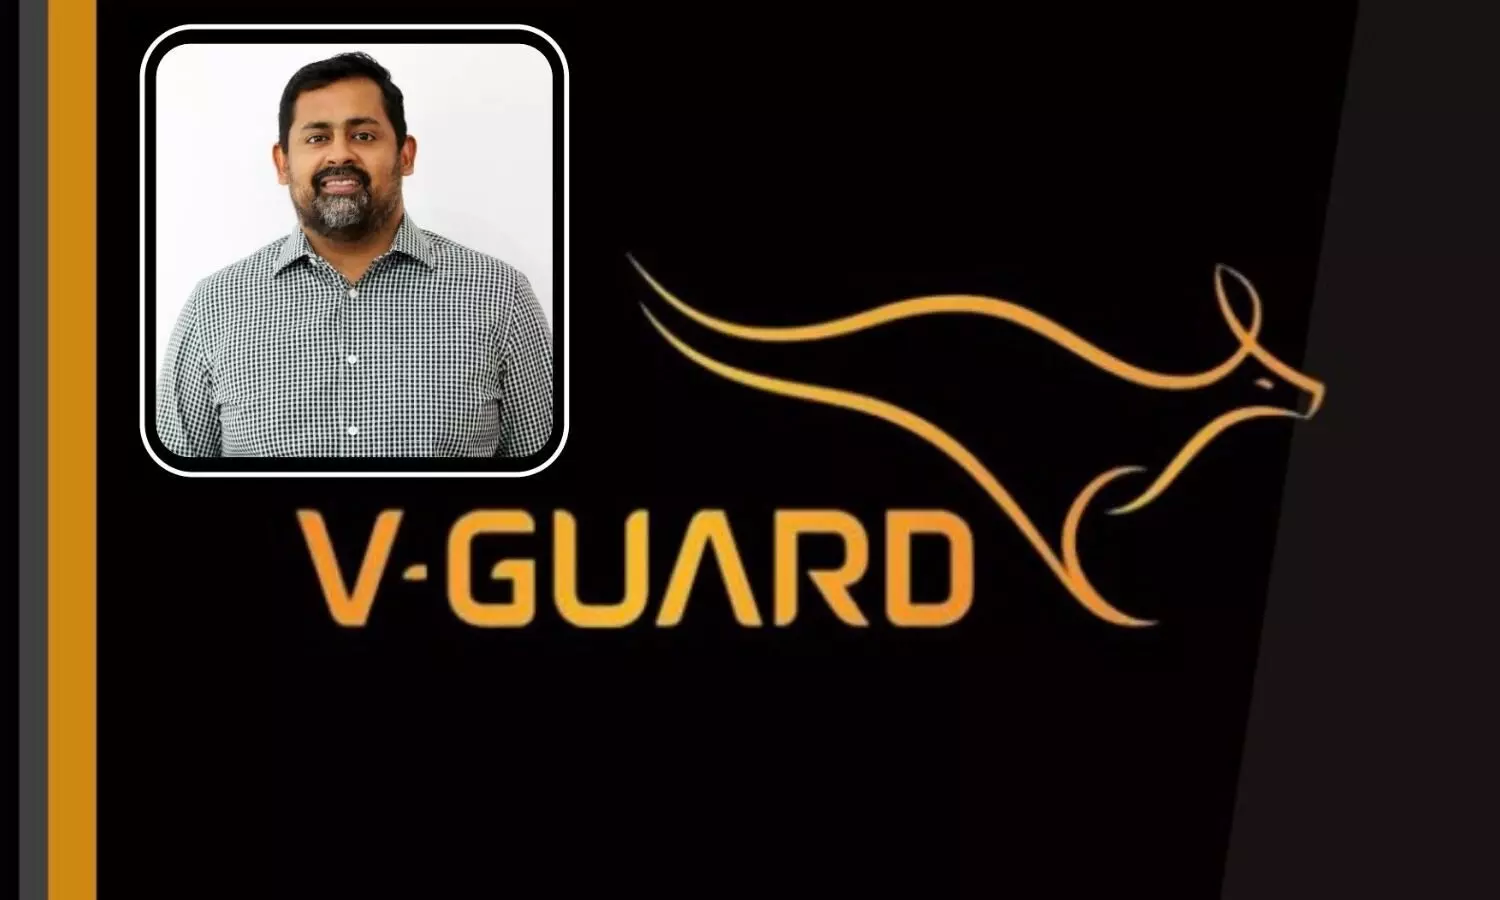 Mithun K Chittilappilly and V-Guard Industries